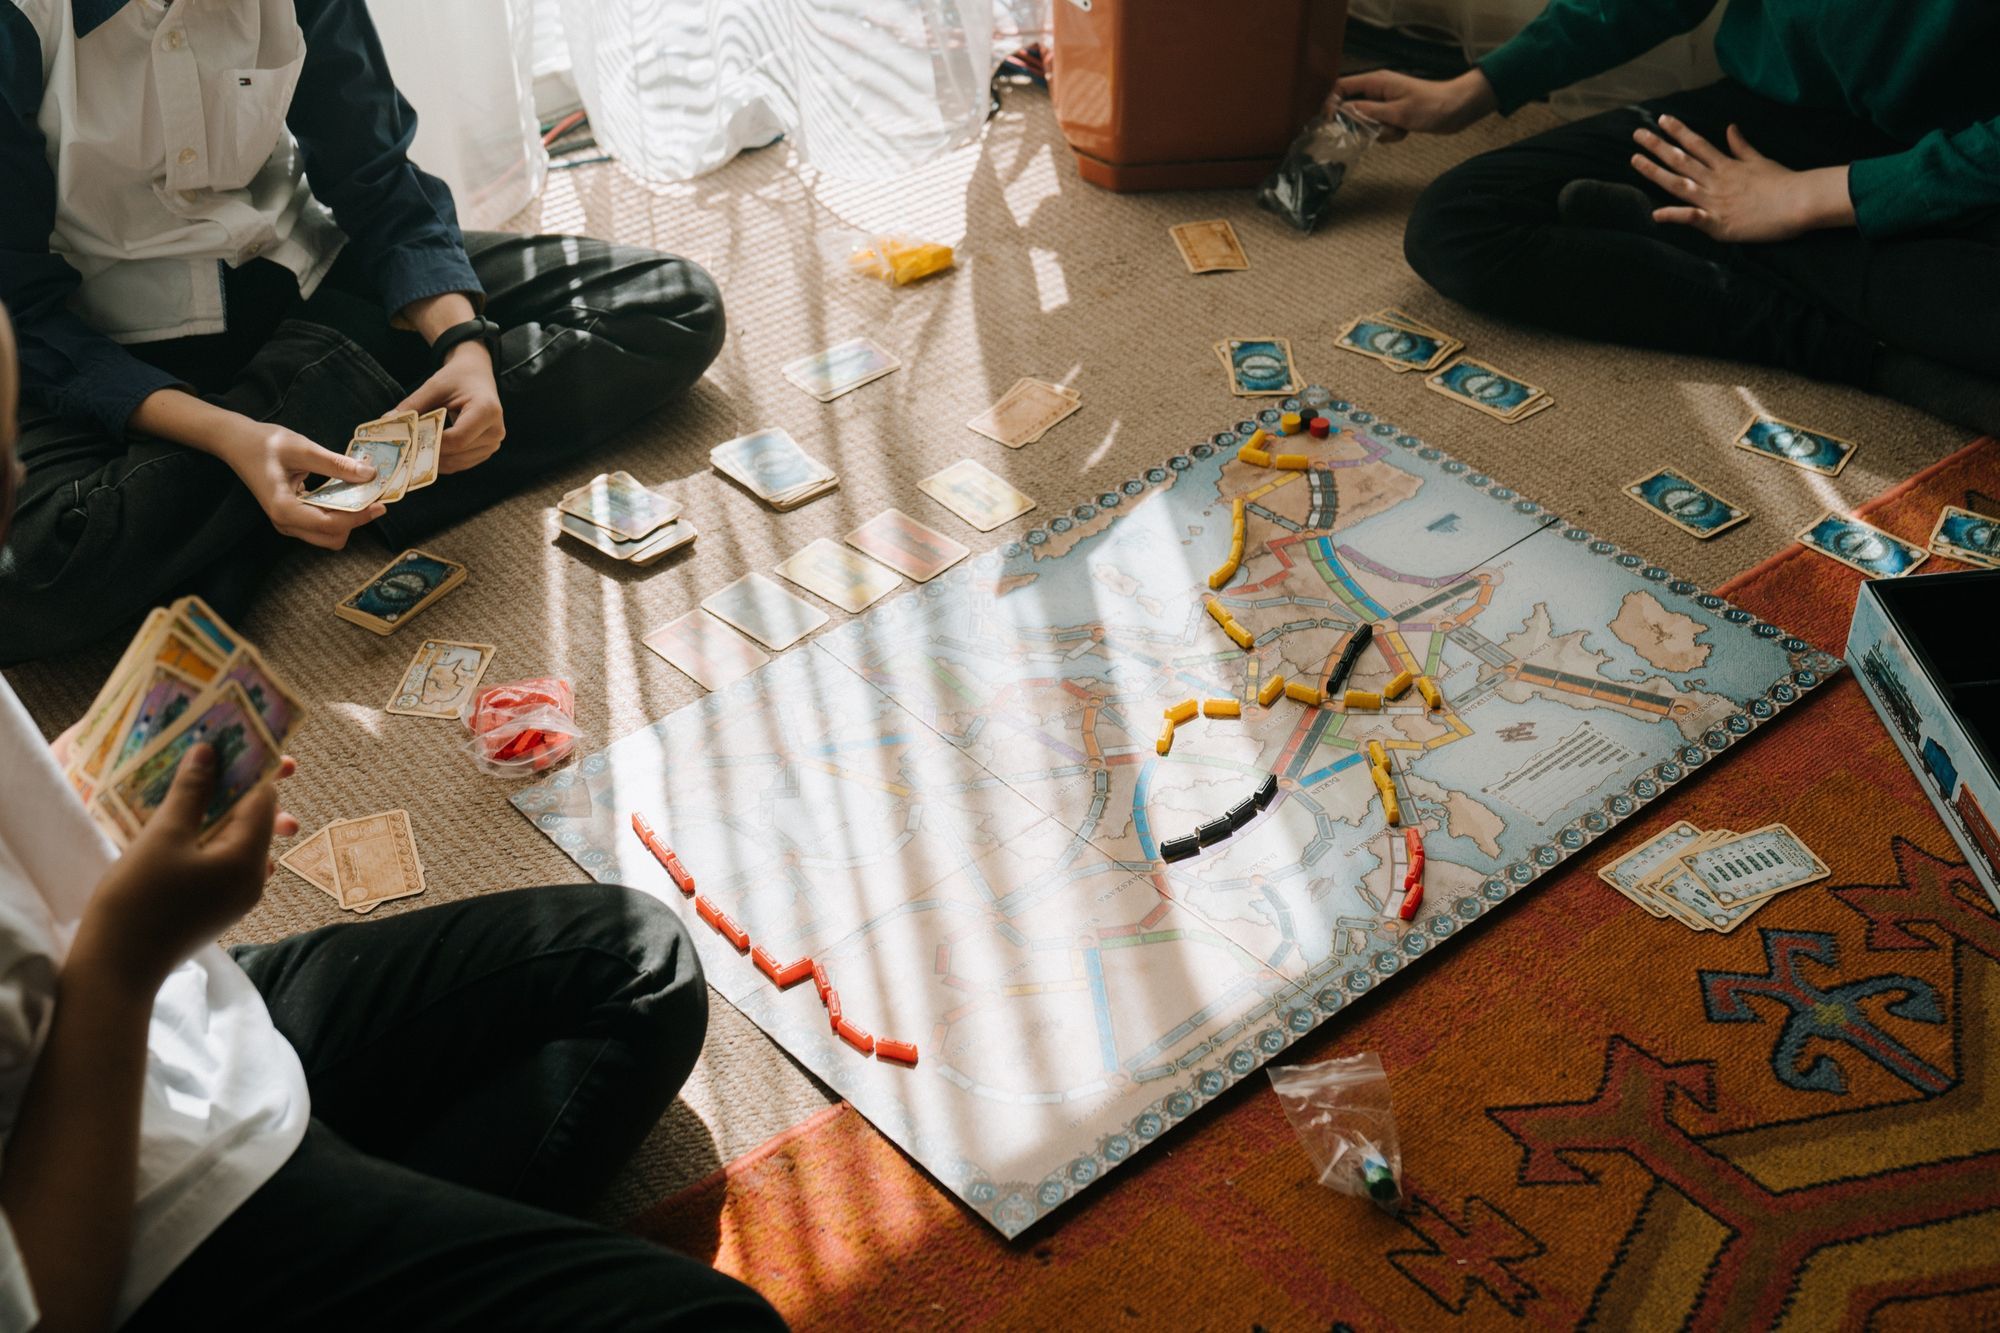 How Board Games and Video Games Can Improve Your Skills